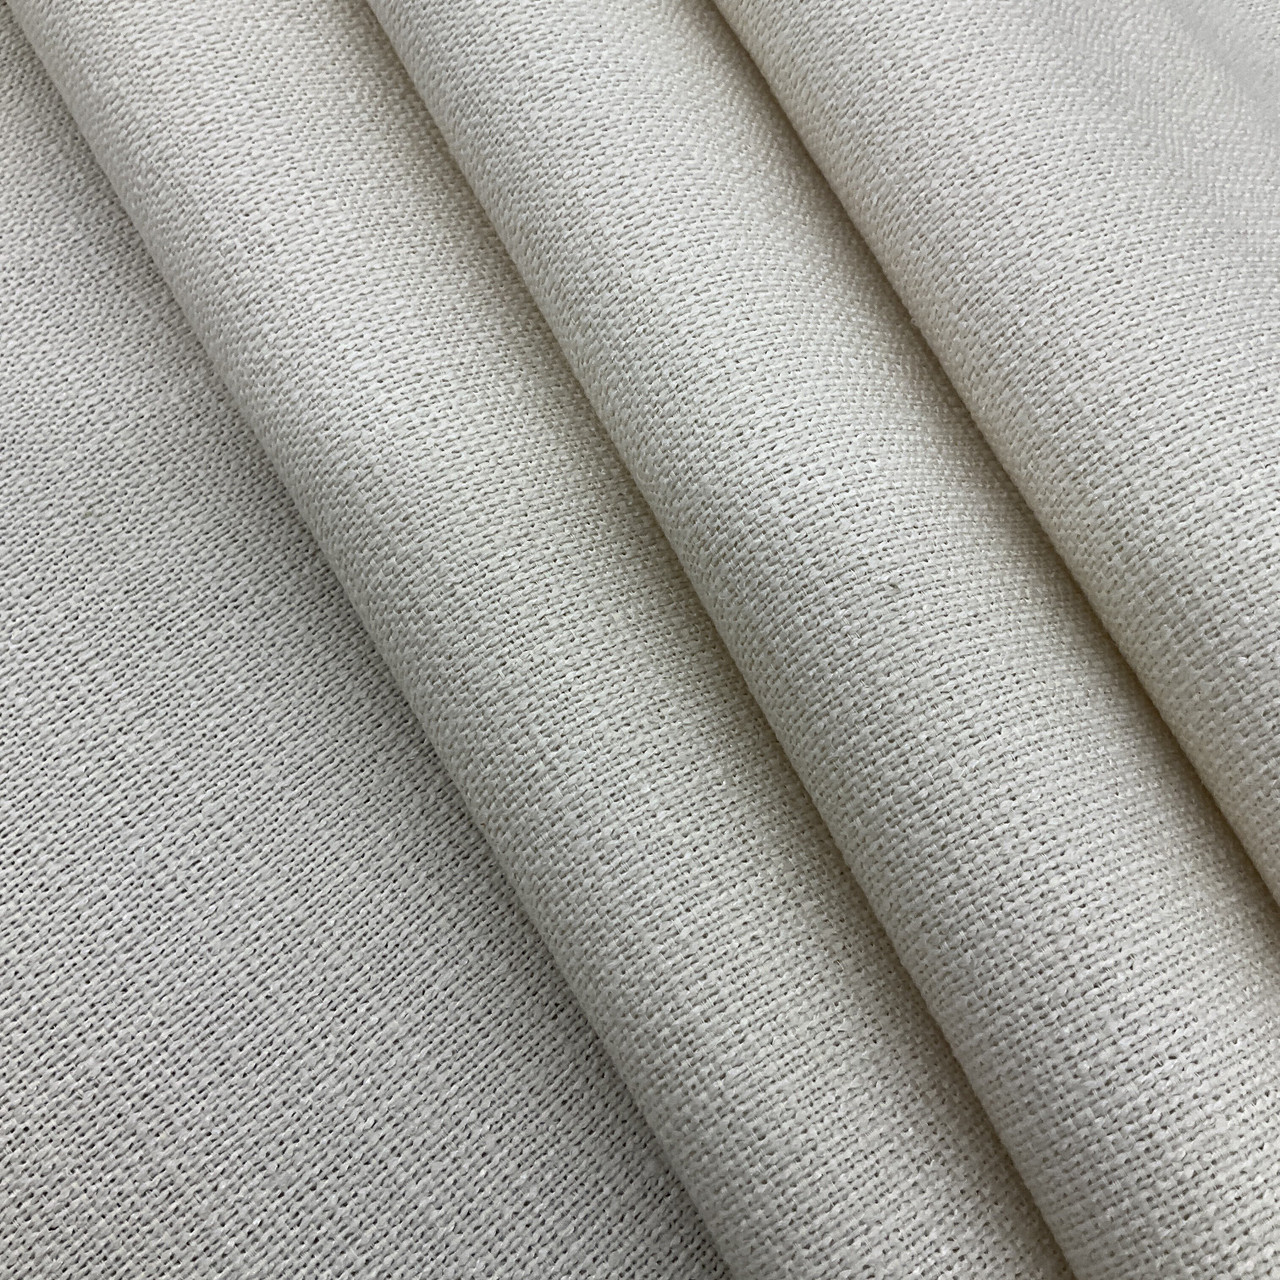 ENTELARE 11oz Polyester Blend Upholstery Sewing Fabric by The Yard Width 57 Inches Ivory White